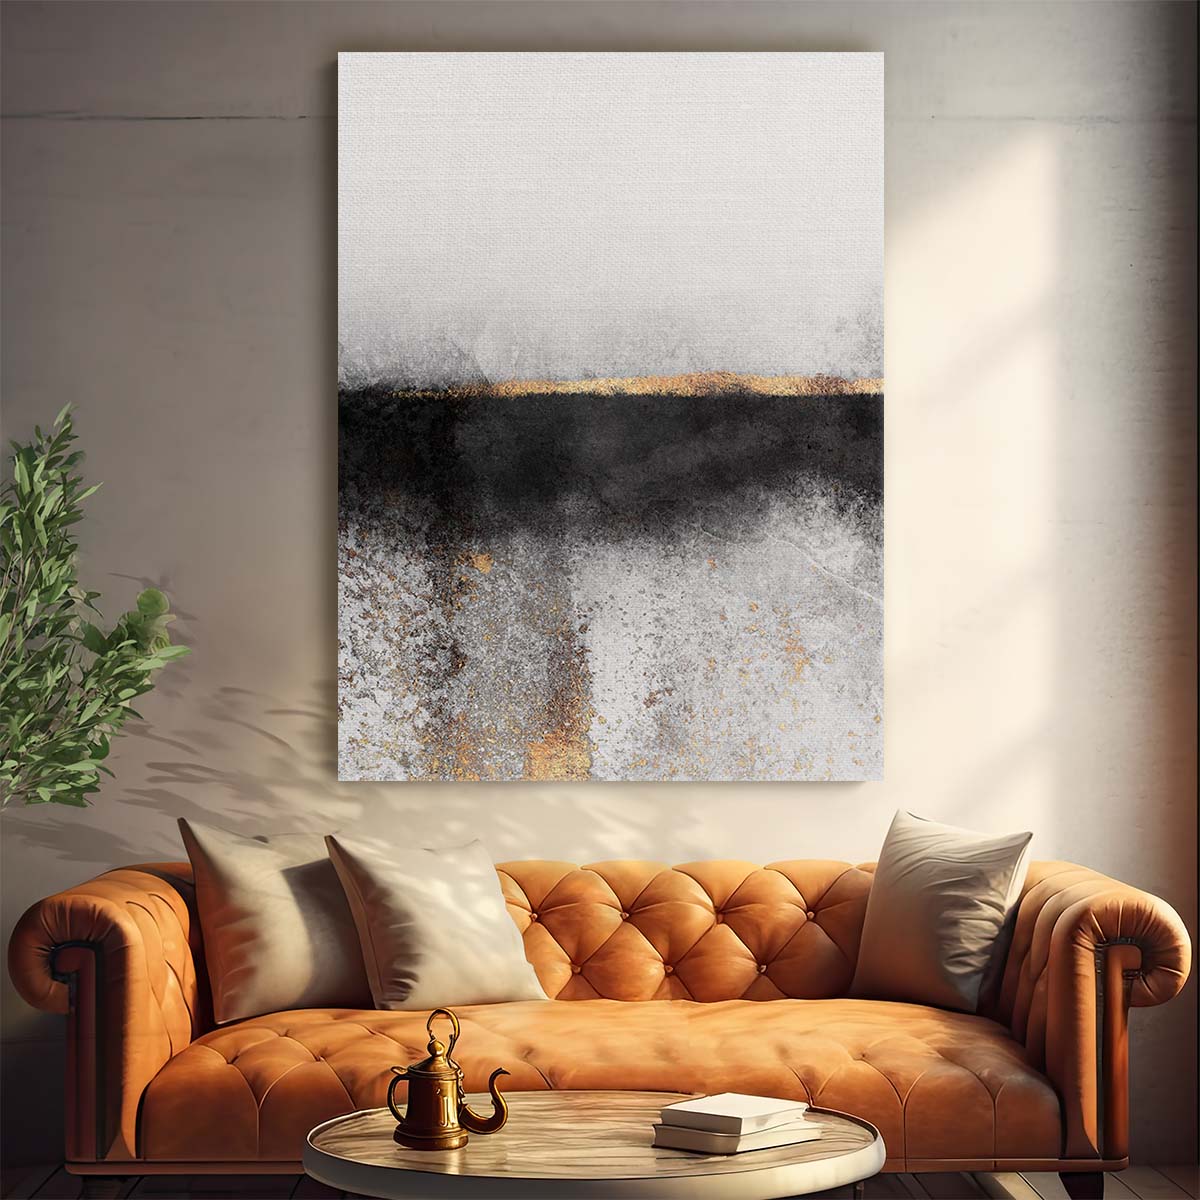 Minimalist Soot and Gold Abstract Canvas Illustration with Peeling Paint Texture by Luxuriance Designs, made in USA